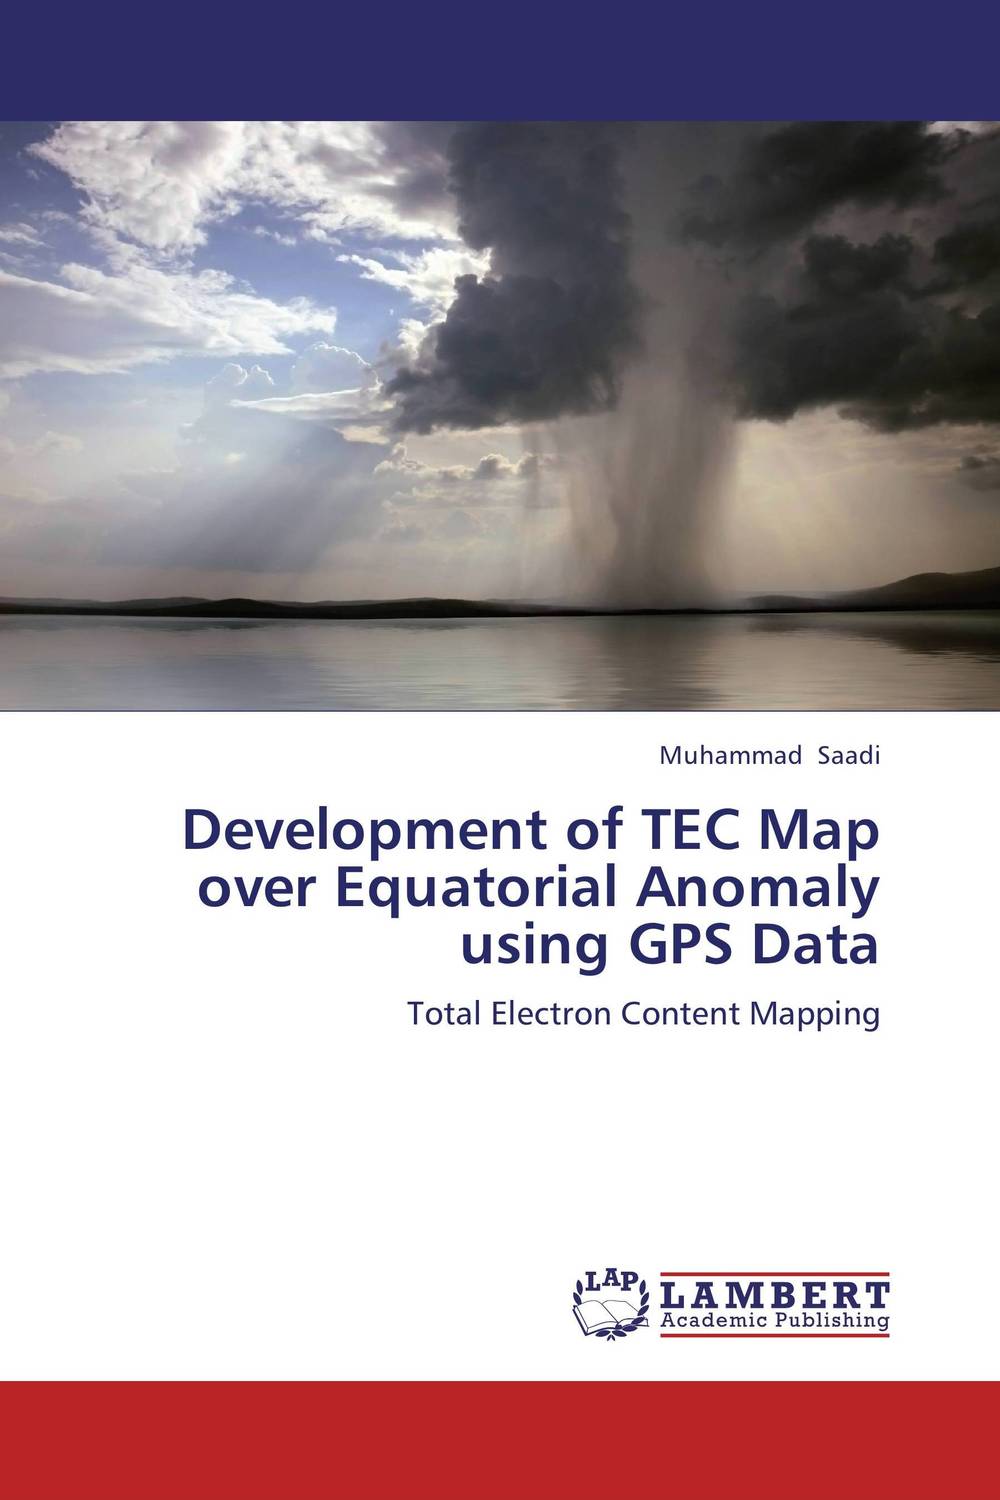 Development of TEC Map over Equatorial Anomaly using GPS Data